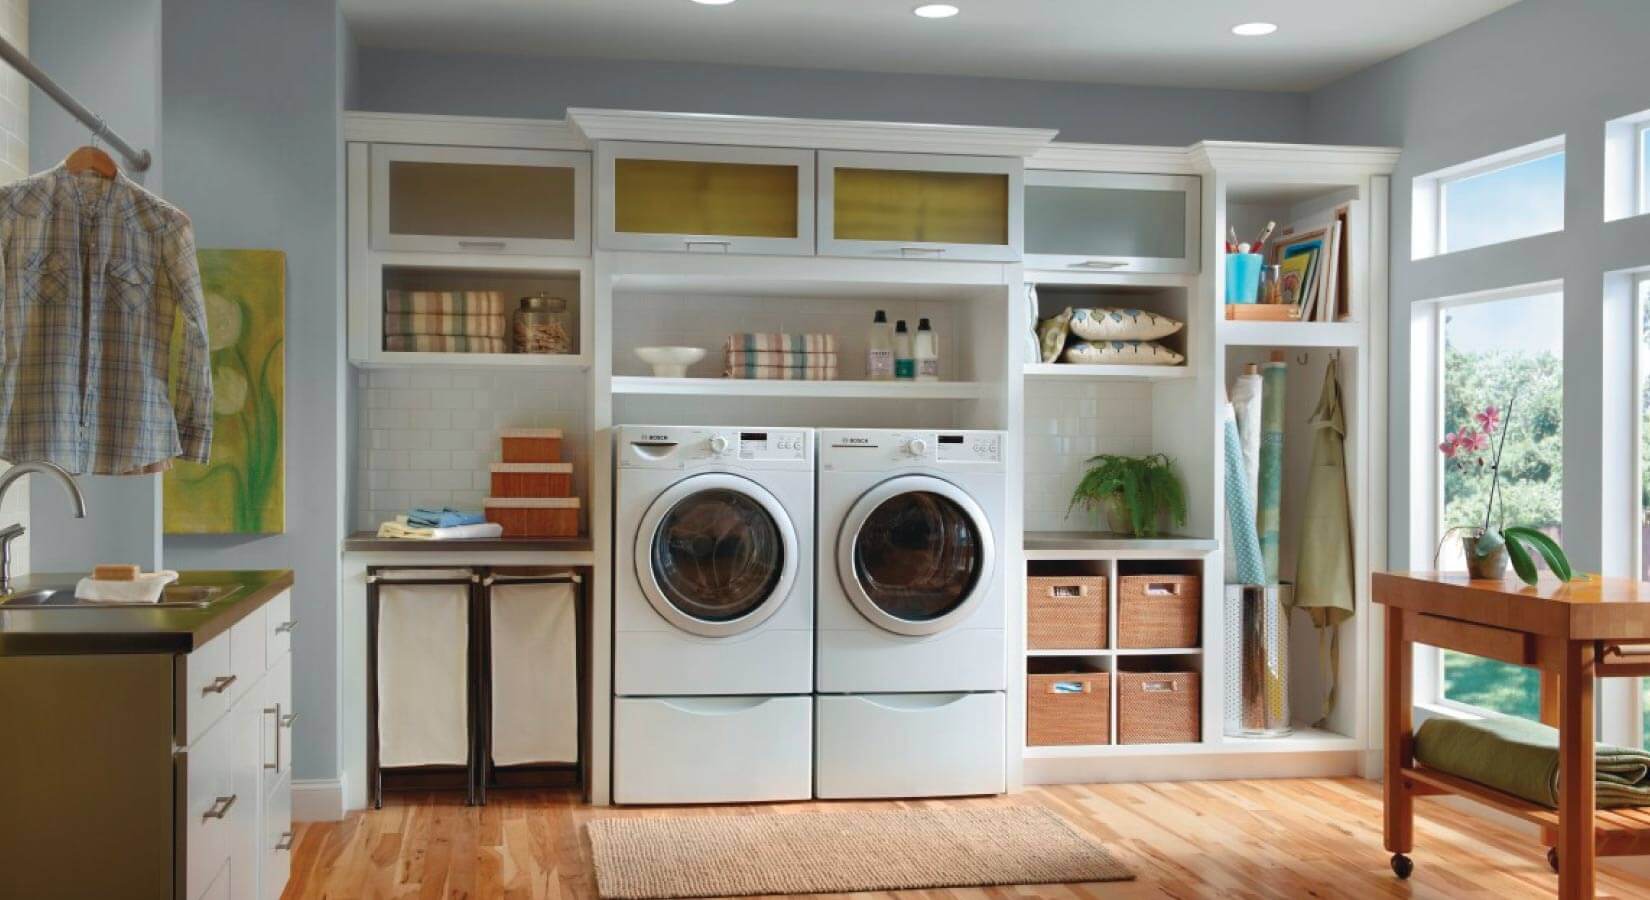 https://cdn.kitchencabinetkings.com/media/siege/laundry-room-cabinets/frosted-glass-cabinets-laundry-room.jpg